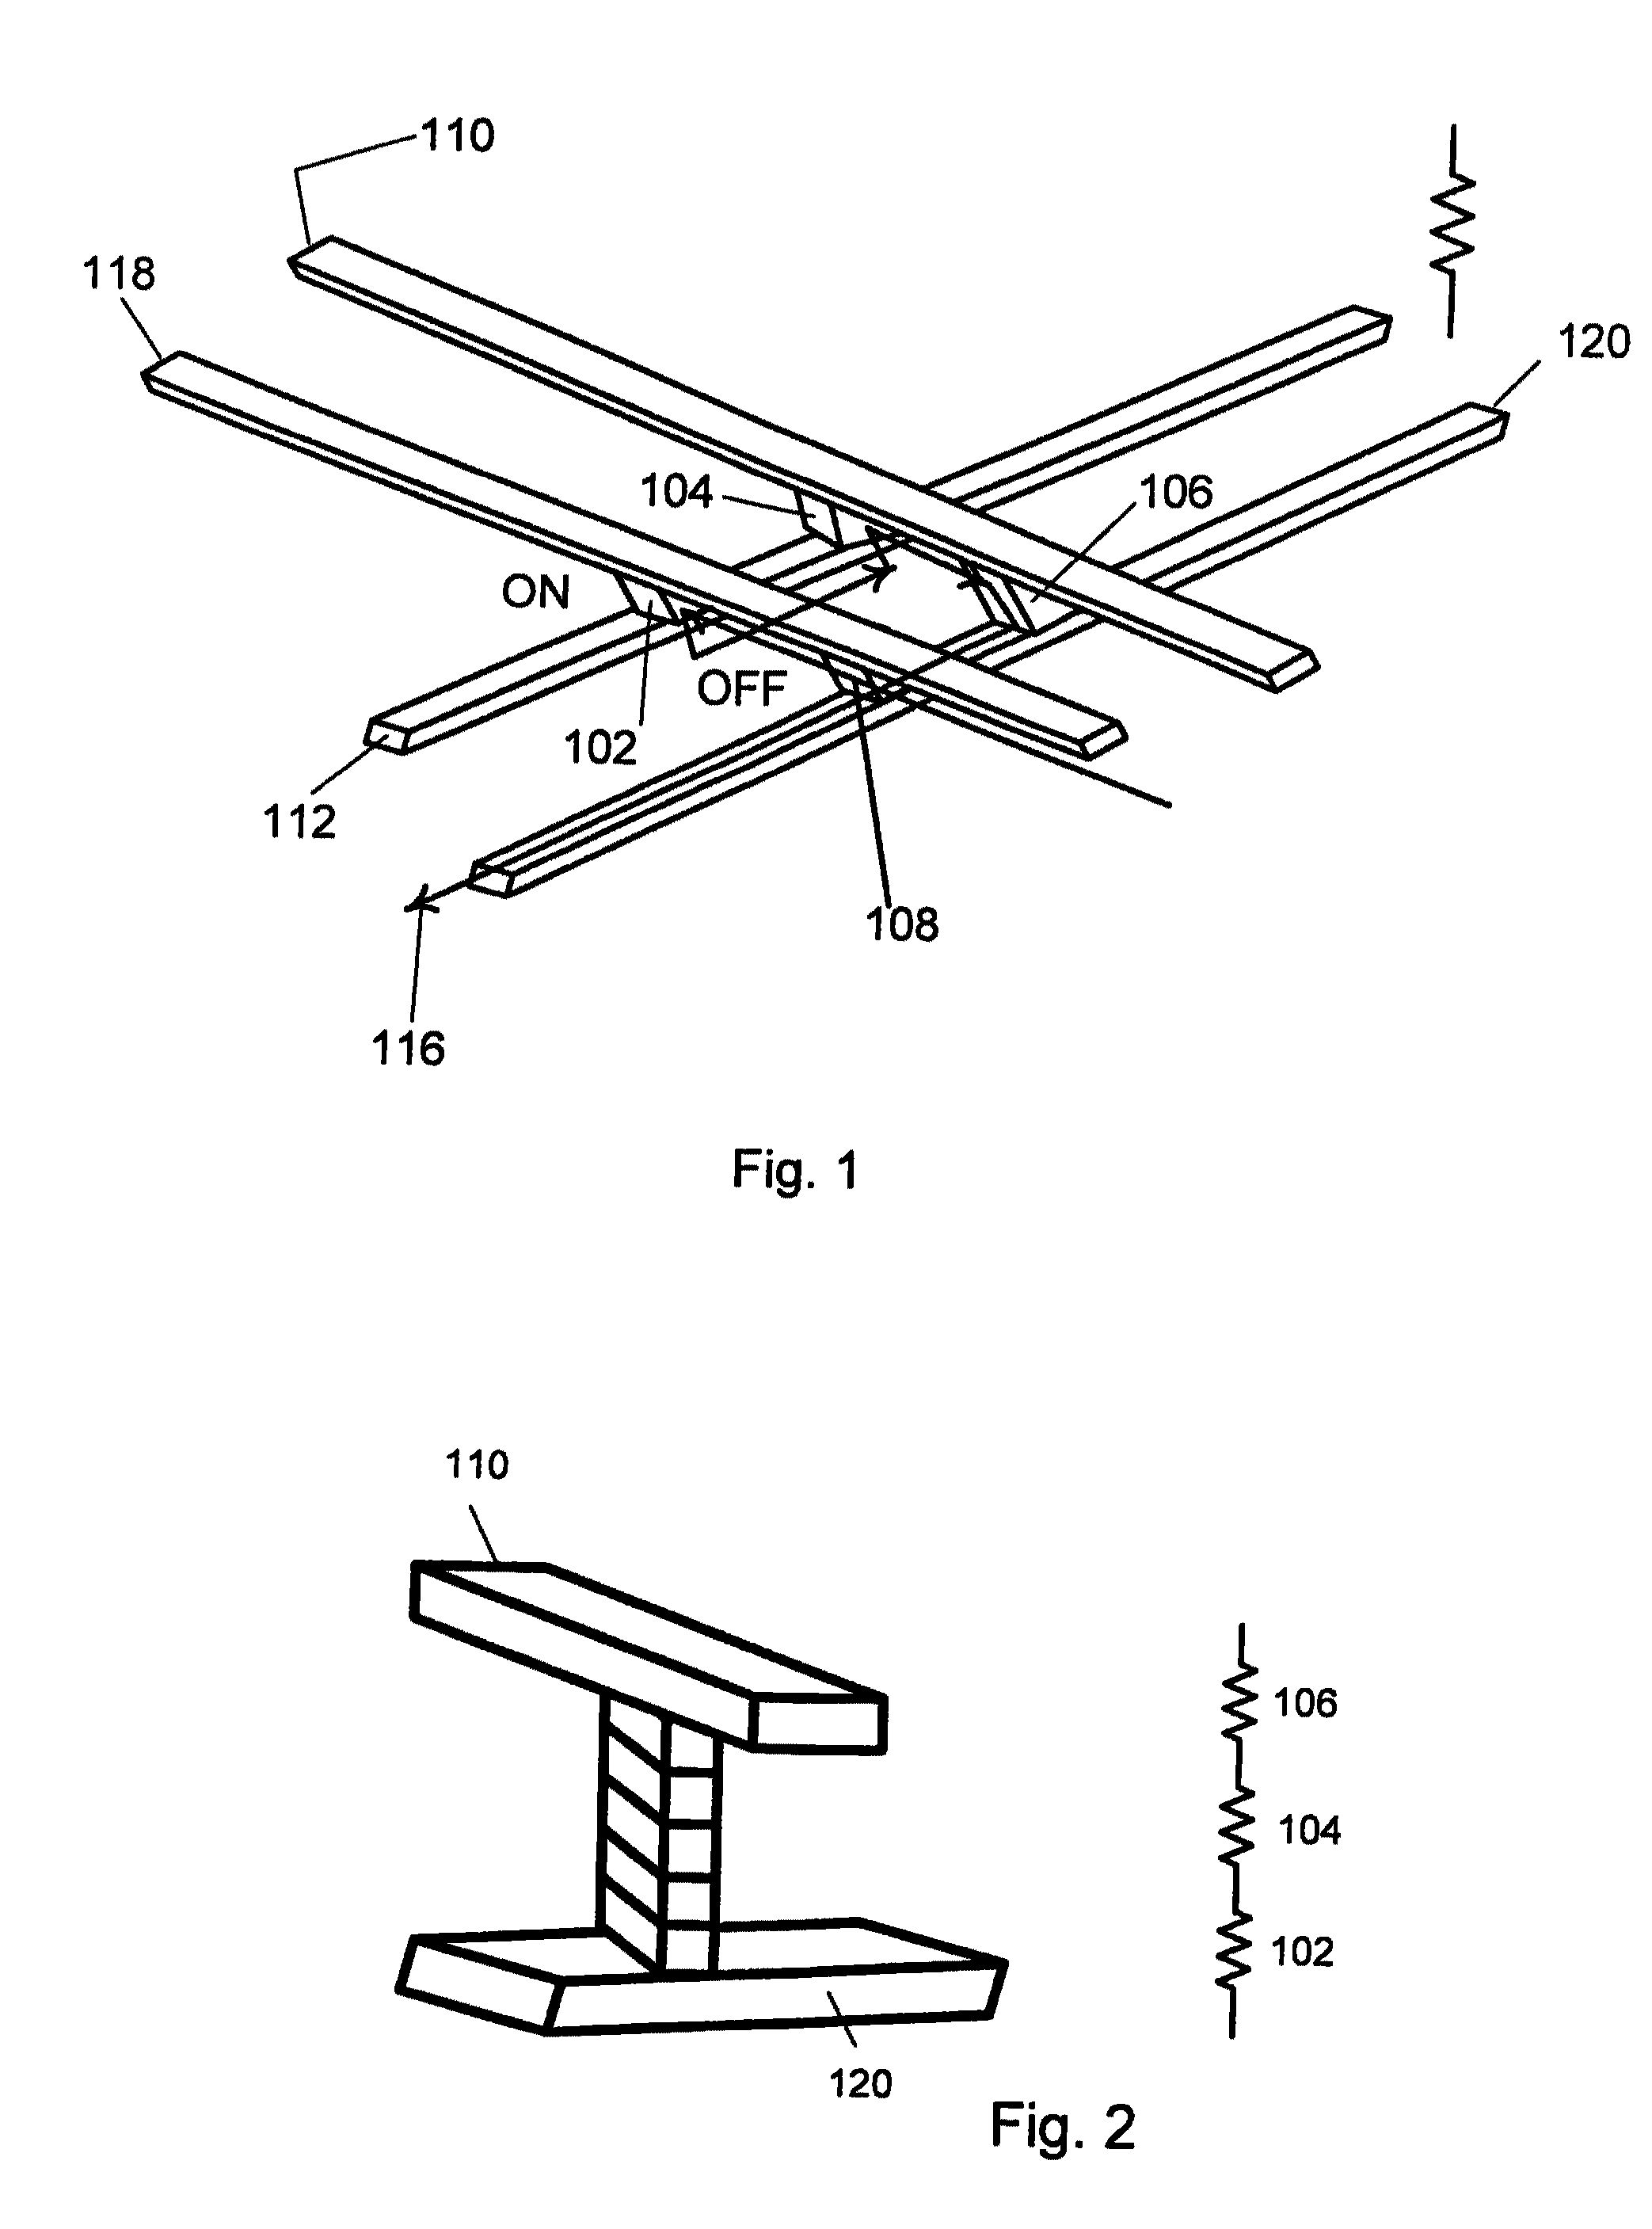 Rectification element and method for resistive switching for non volatile memory device